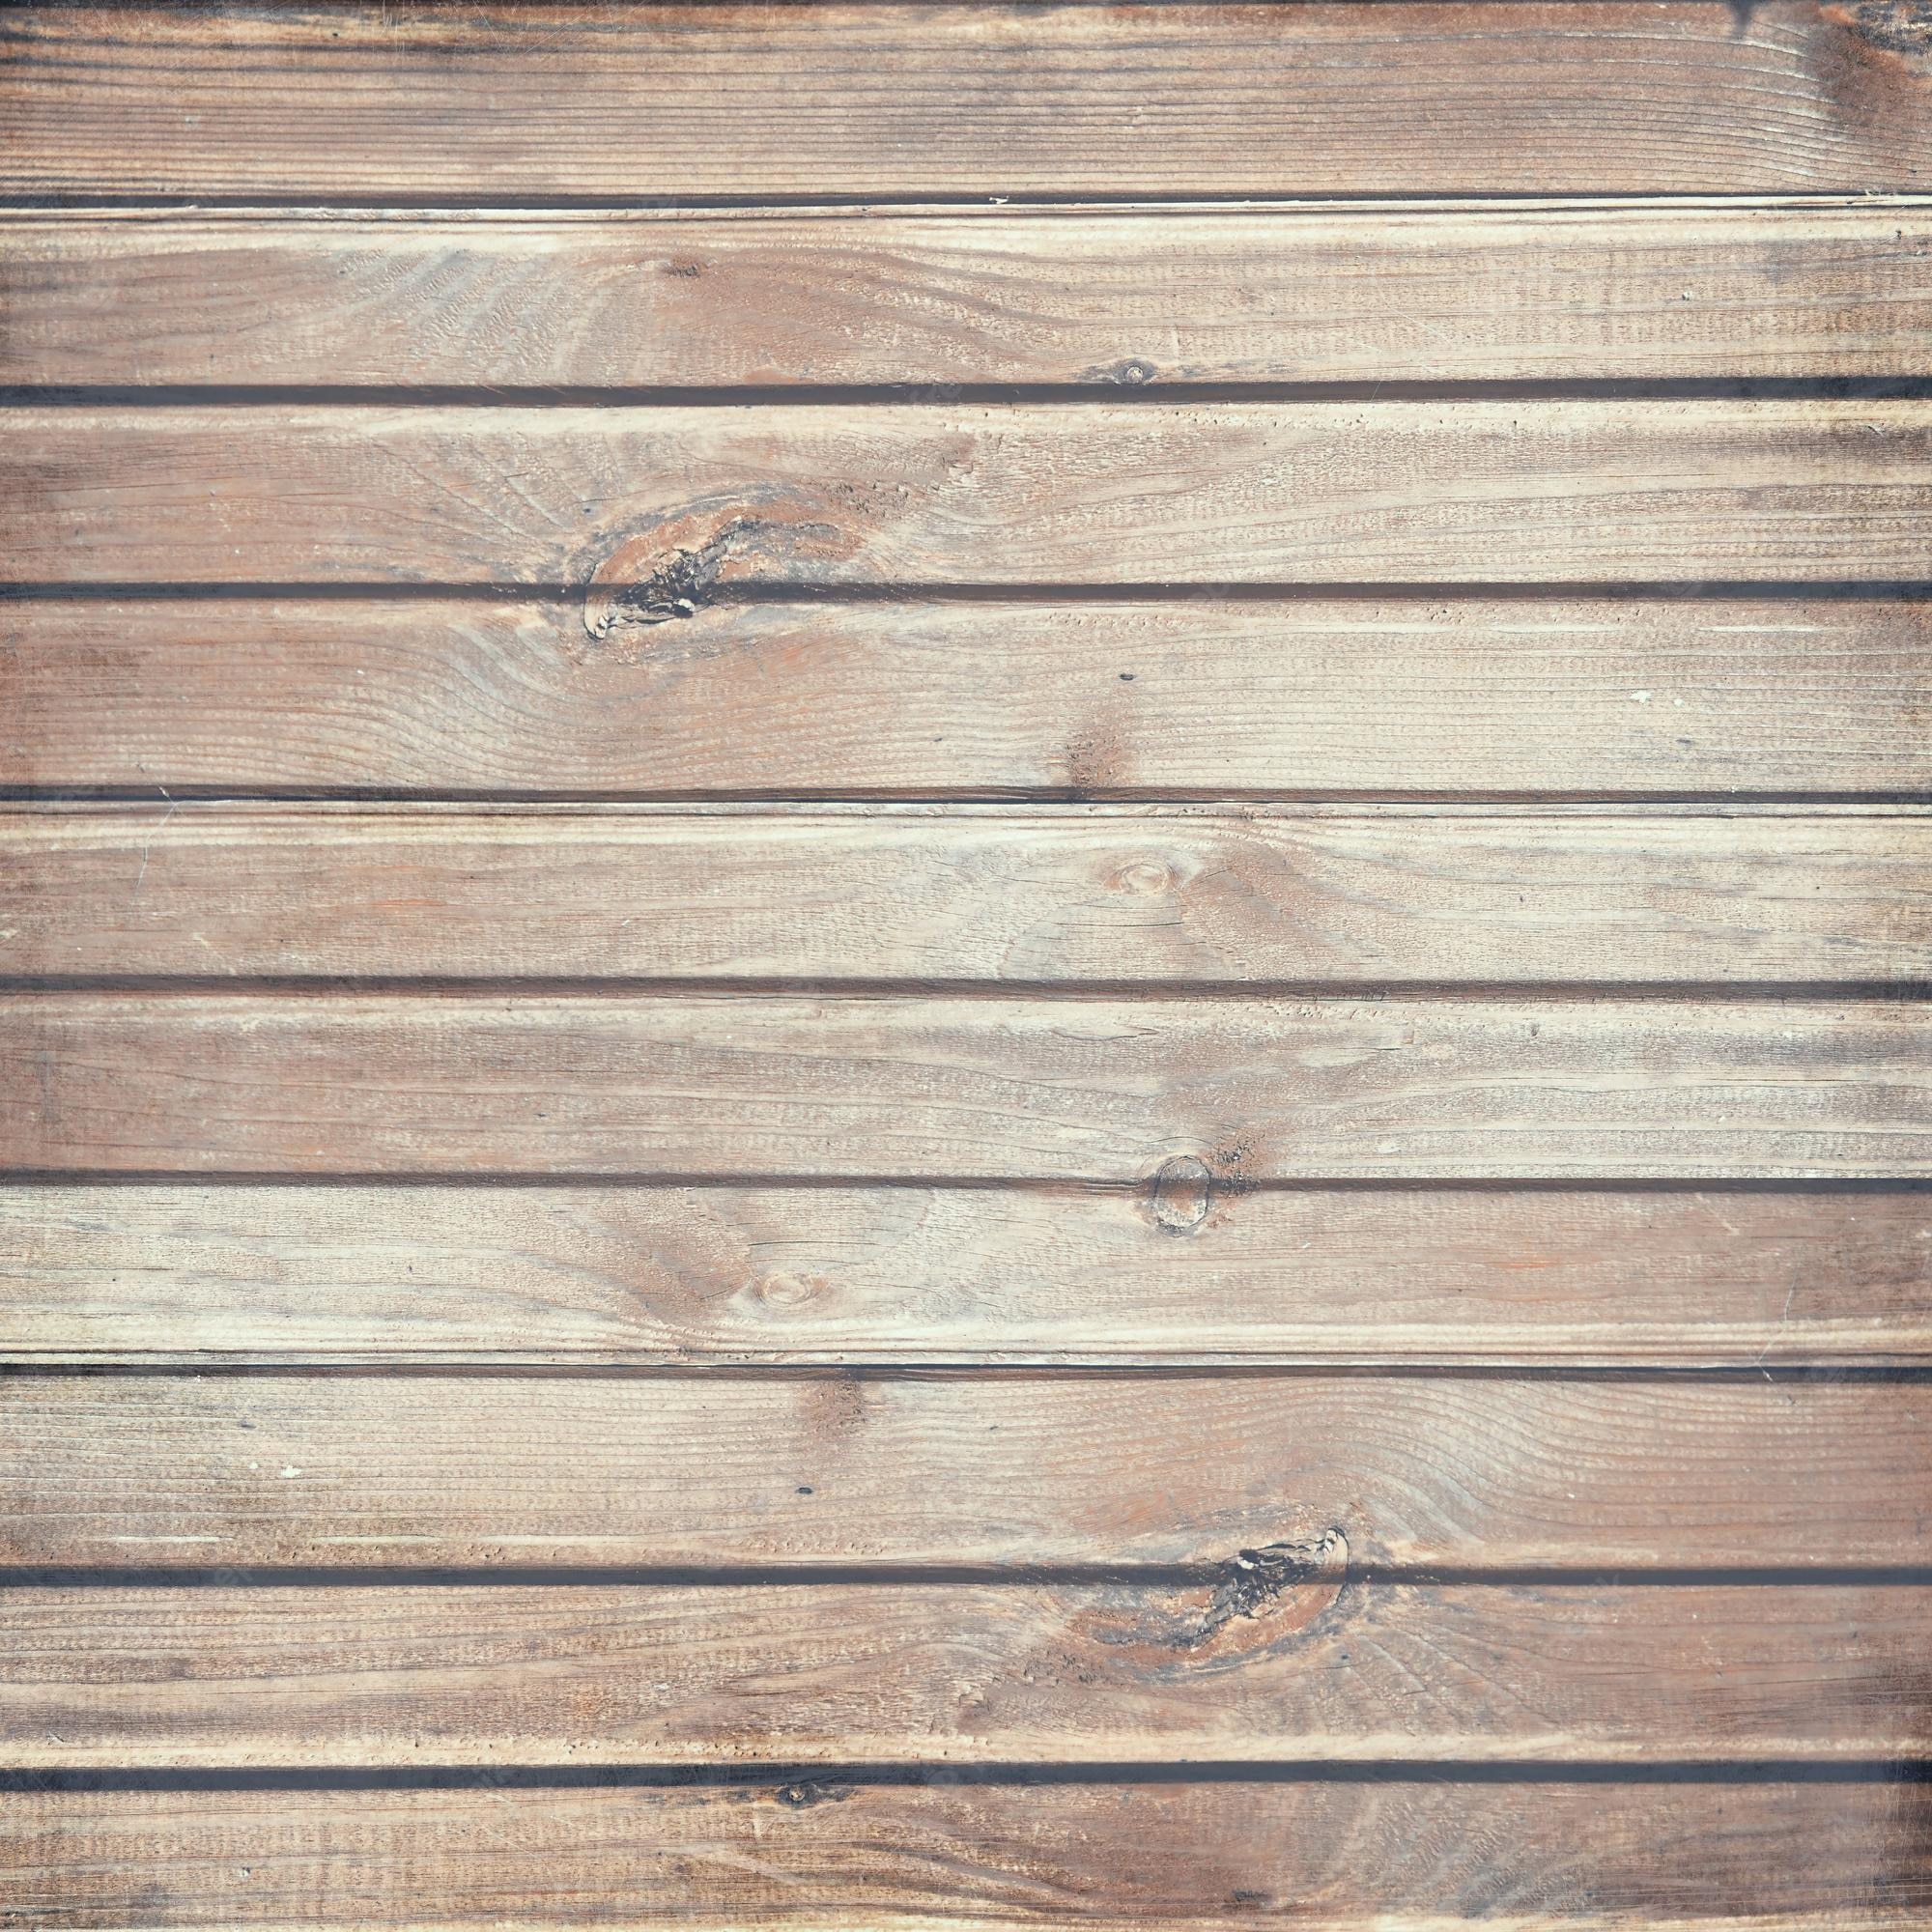 Vintage Country Background